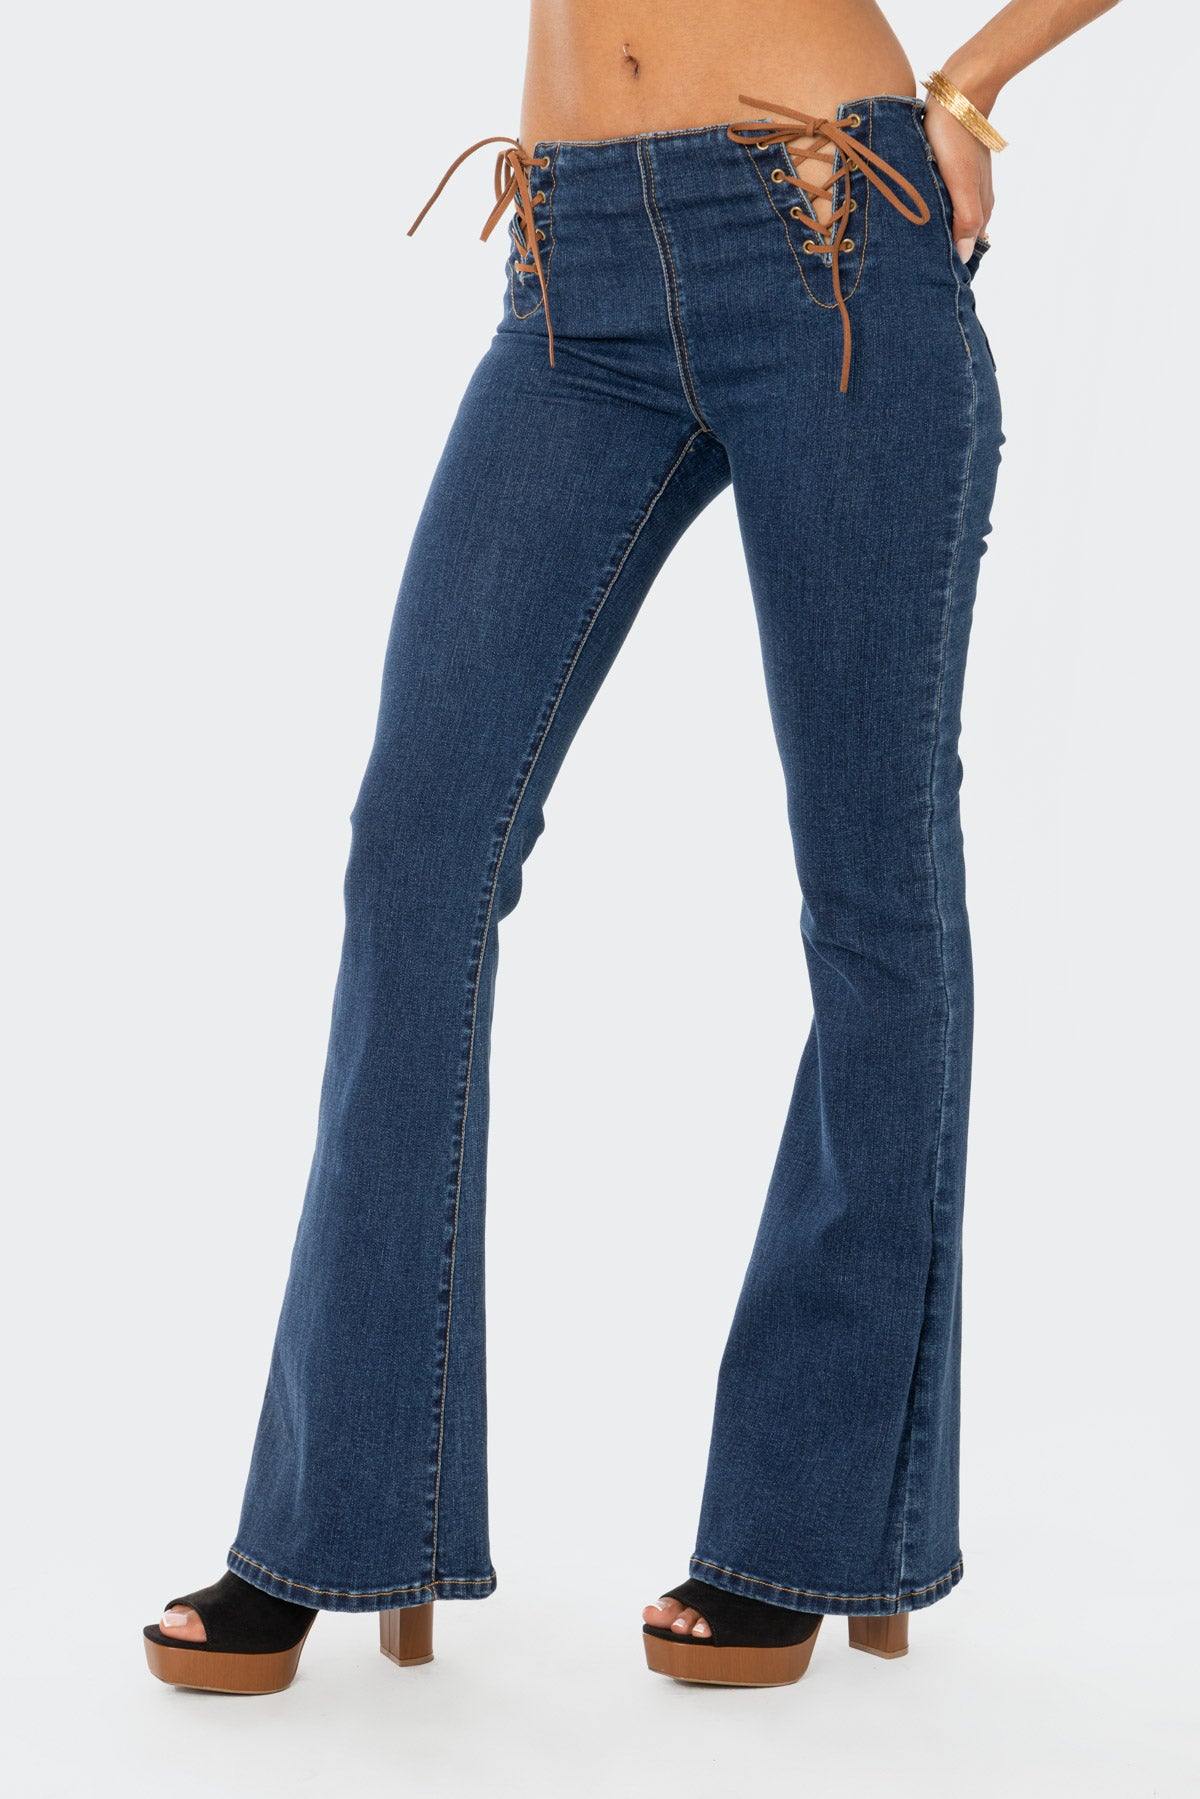 Gini Lace-Up Flared Jeans